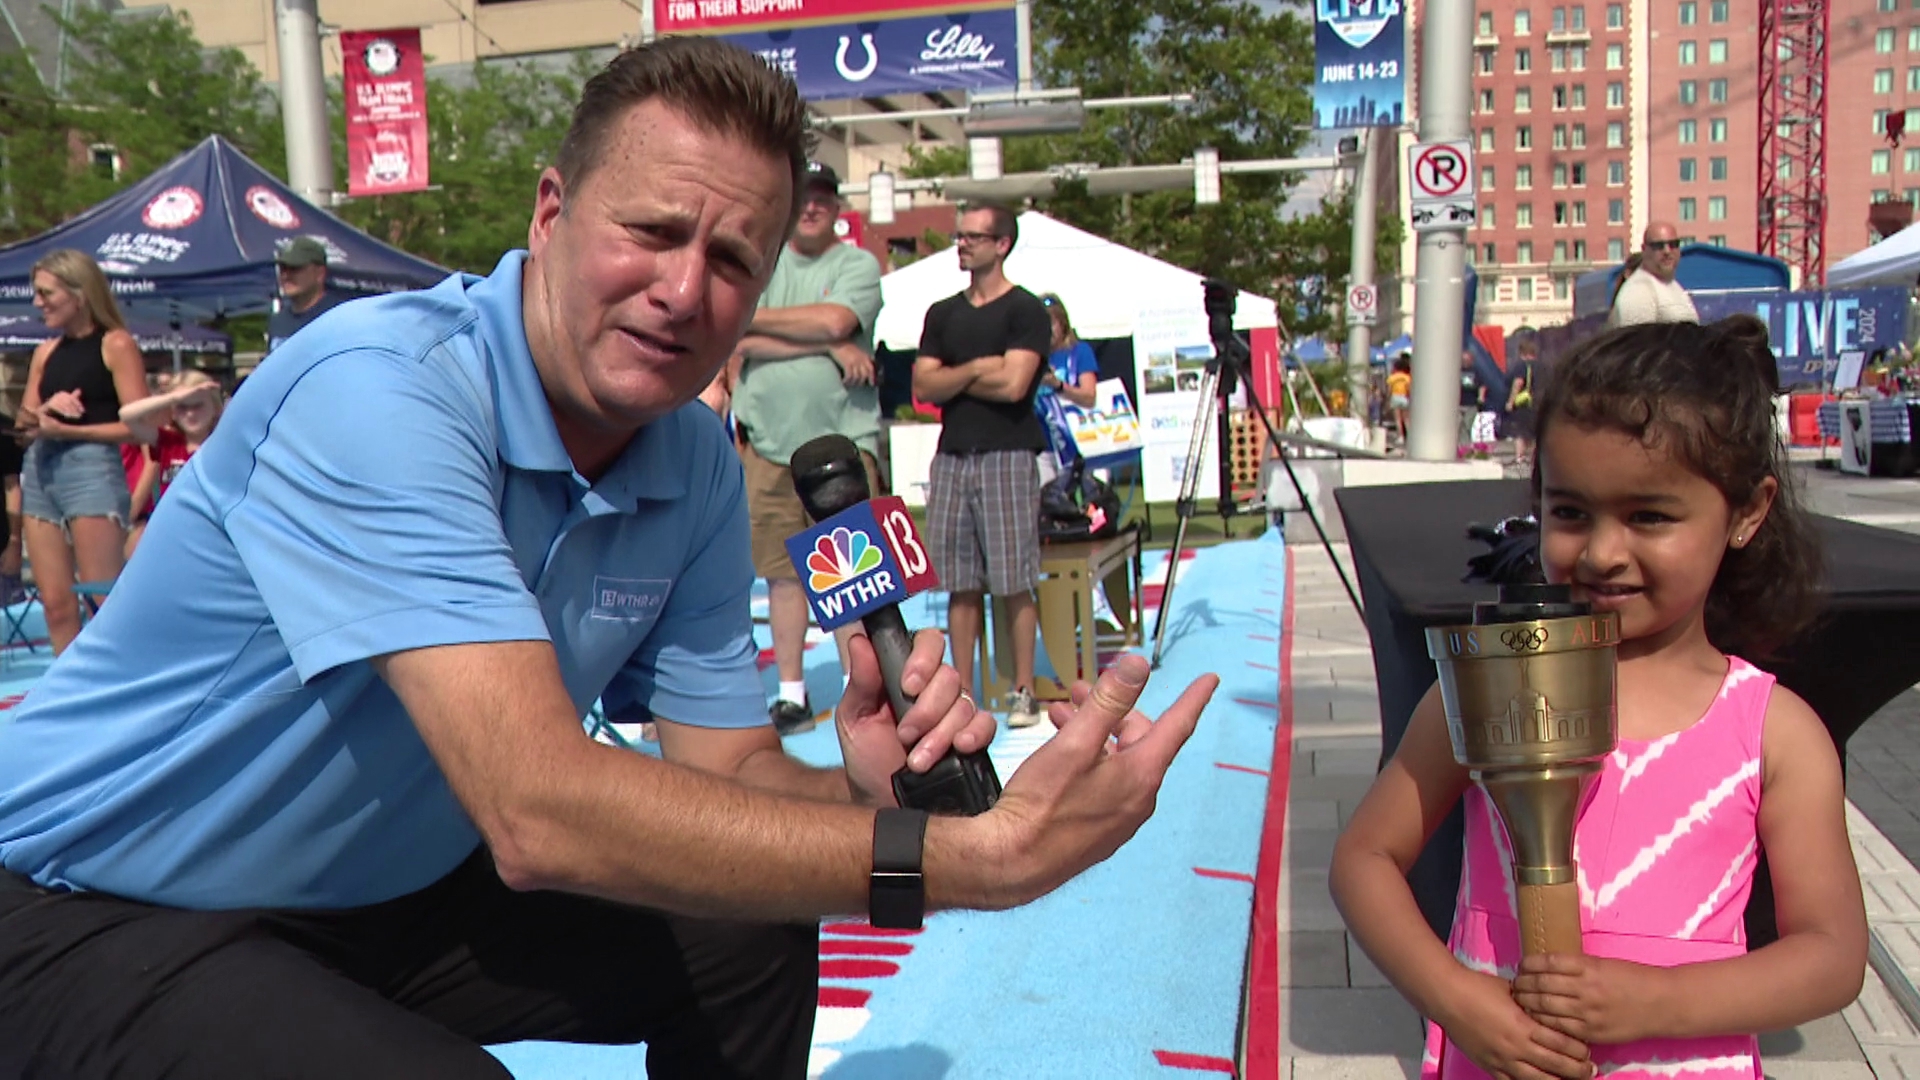 13Sports director Dave Calabro visited Georgia Street during the U.S. Olympic Swim Trials for his weekly quest to find some Good News!